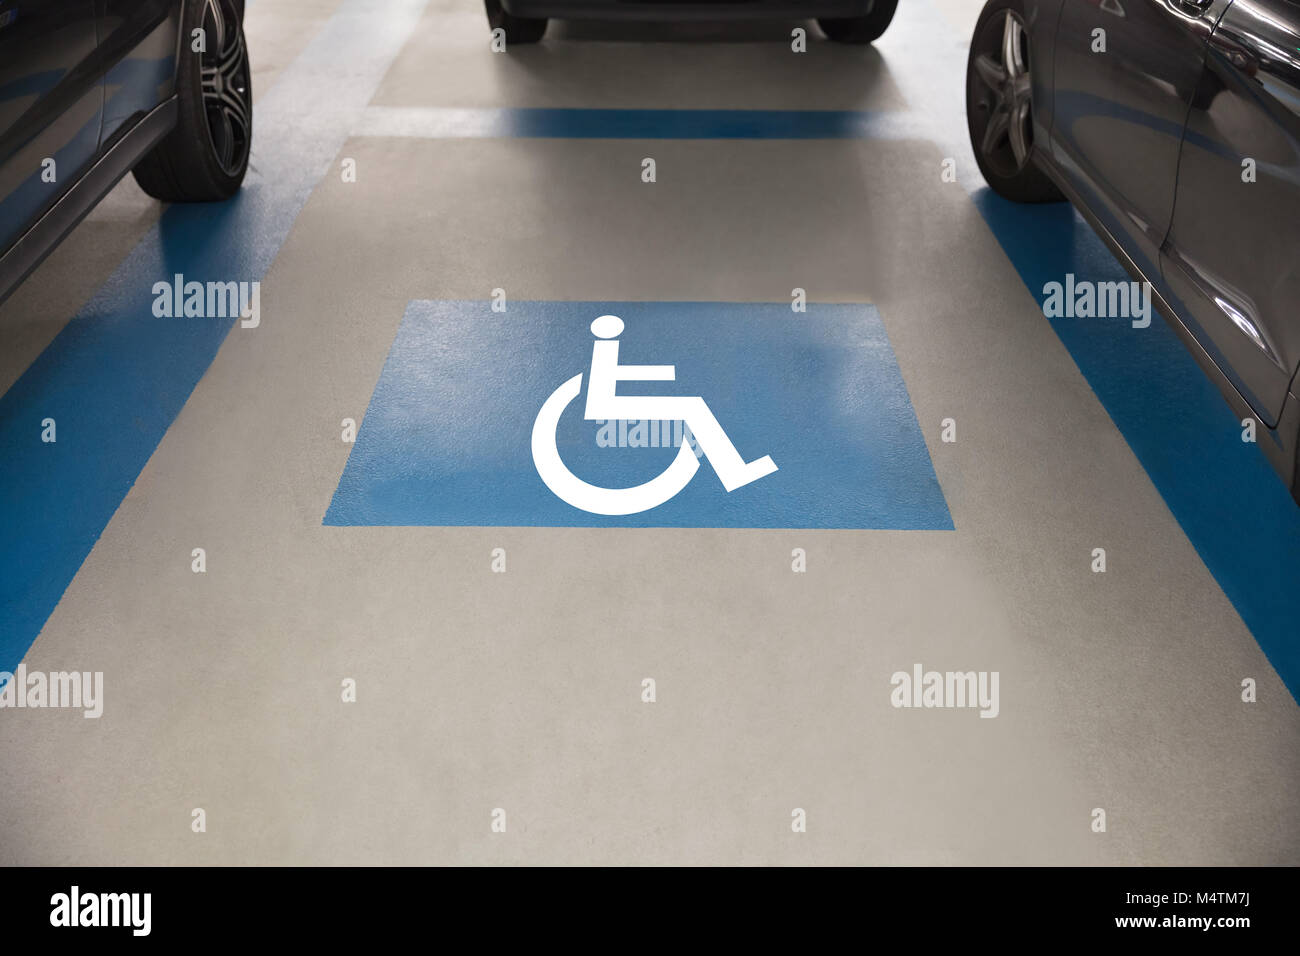 High angle view of handicap sign for parking in garage Stock Photo